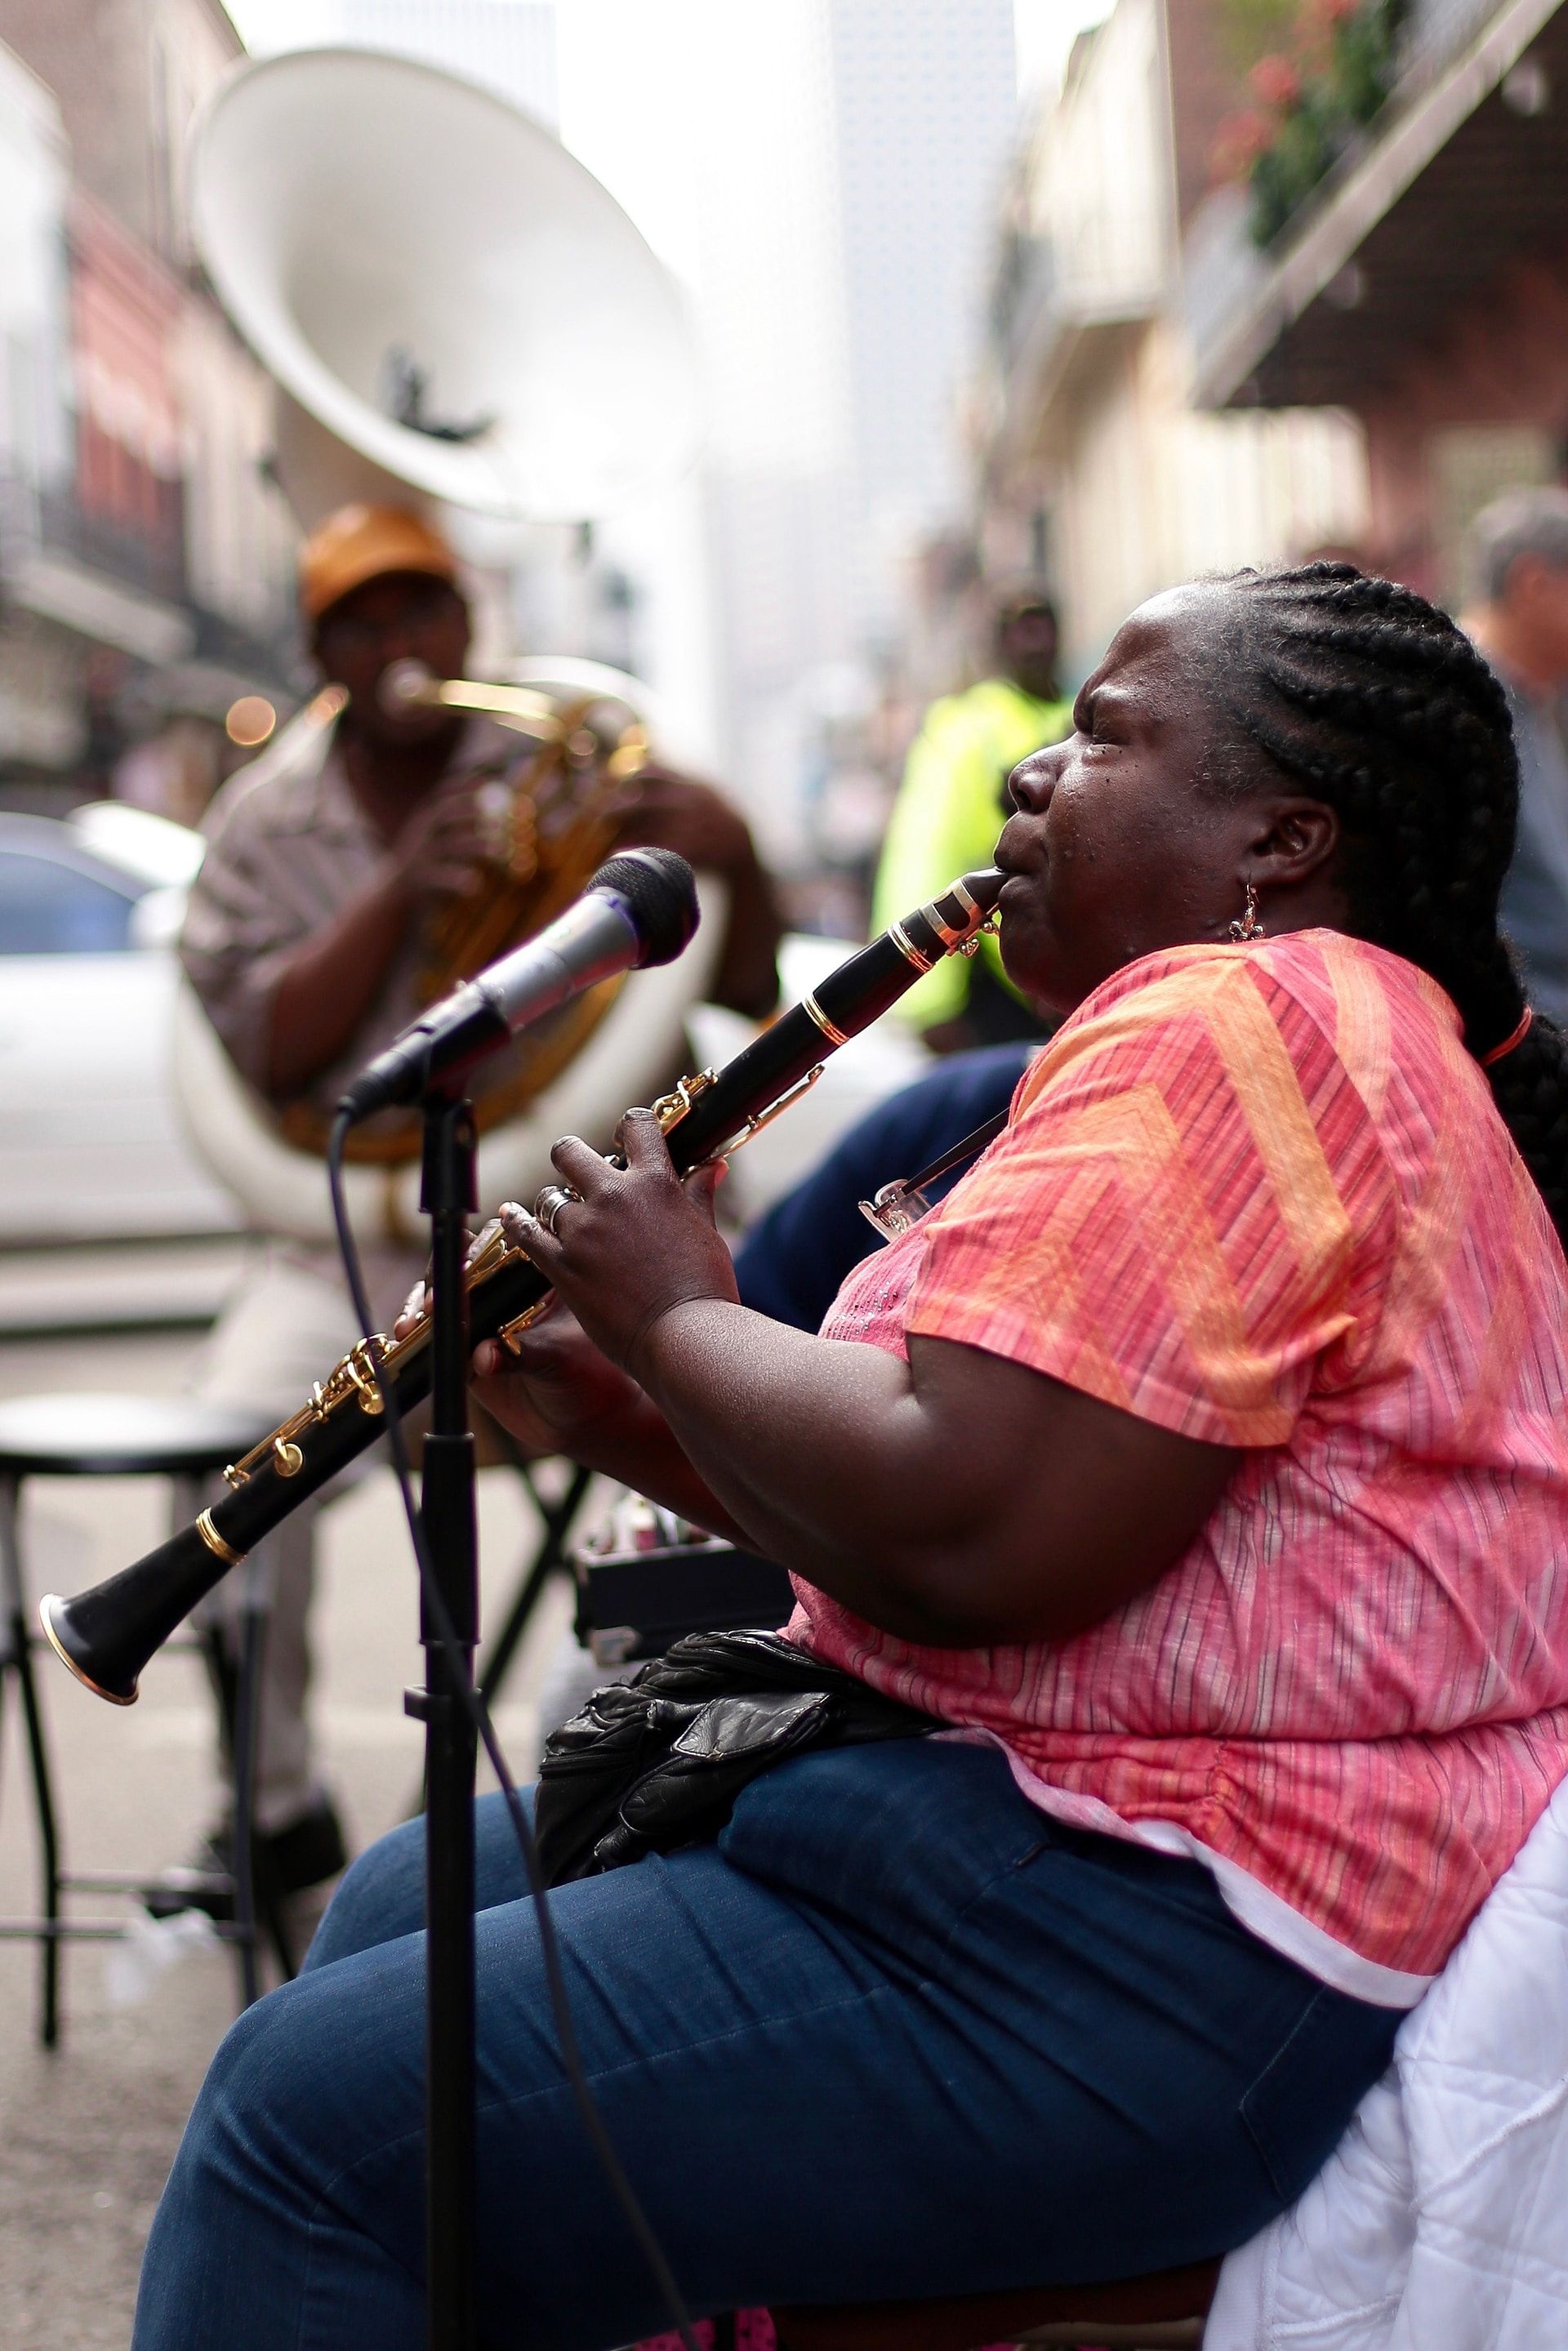 A band performing Jazz music in New Orleans